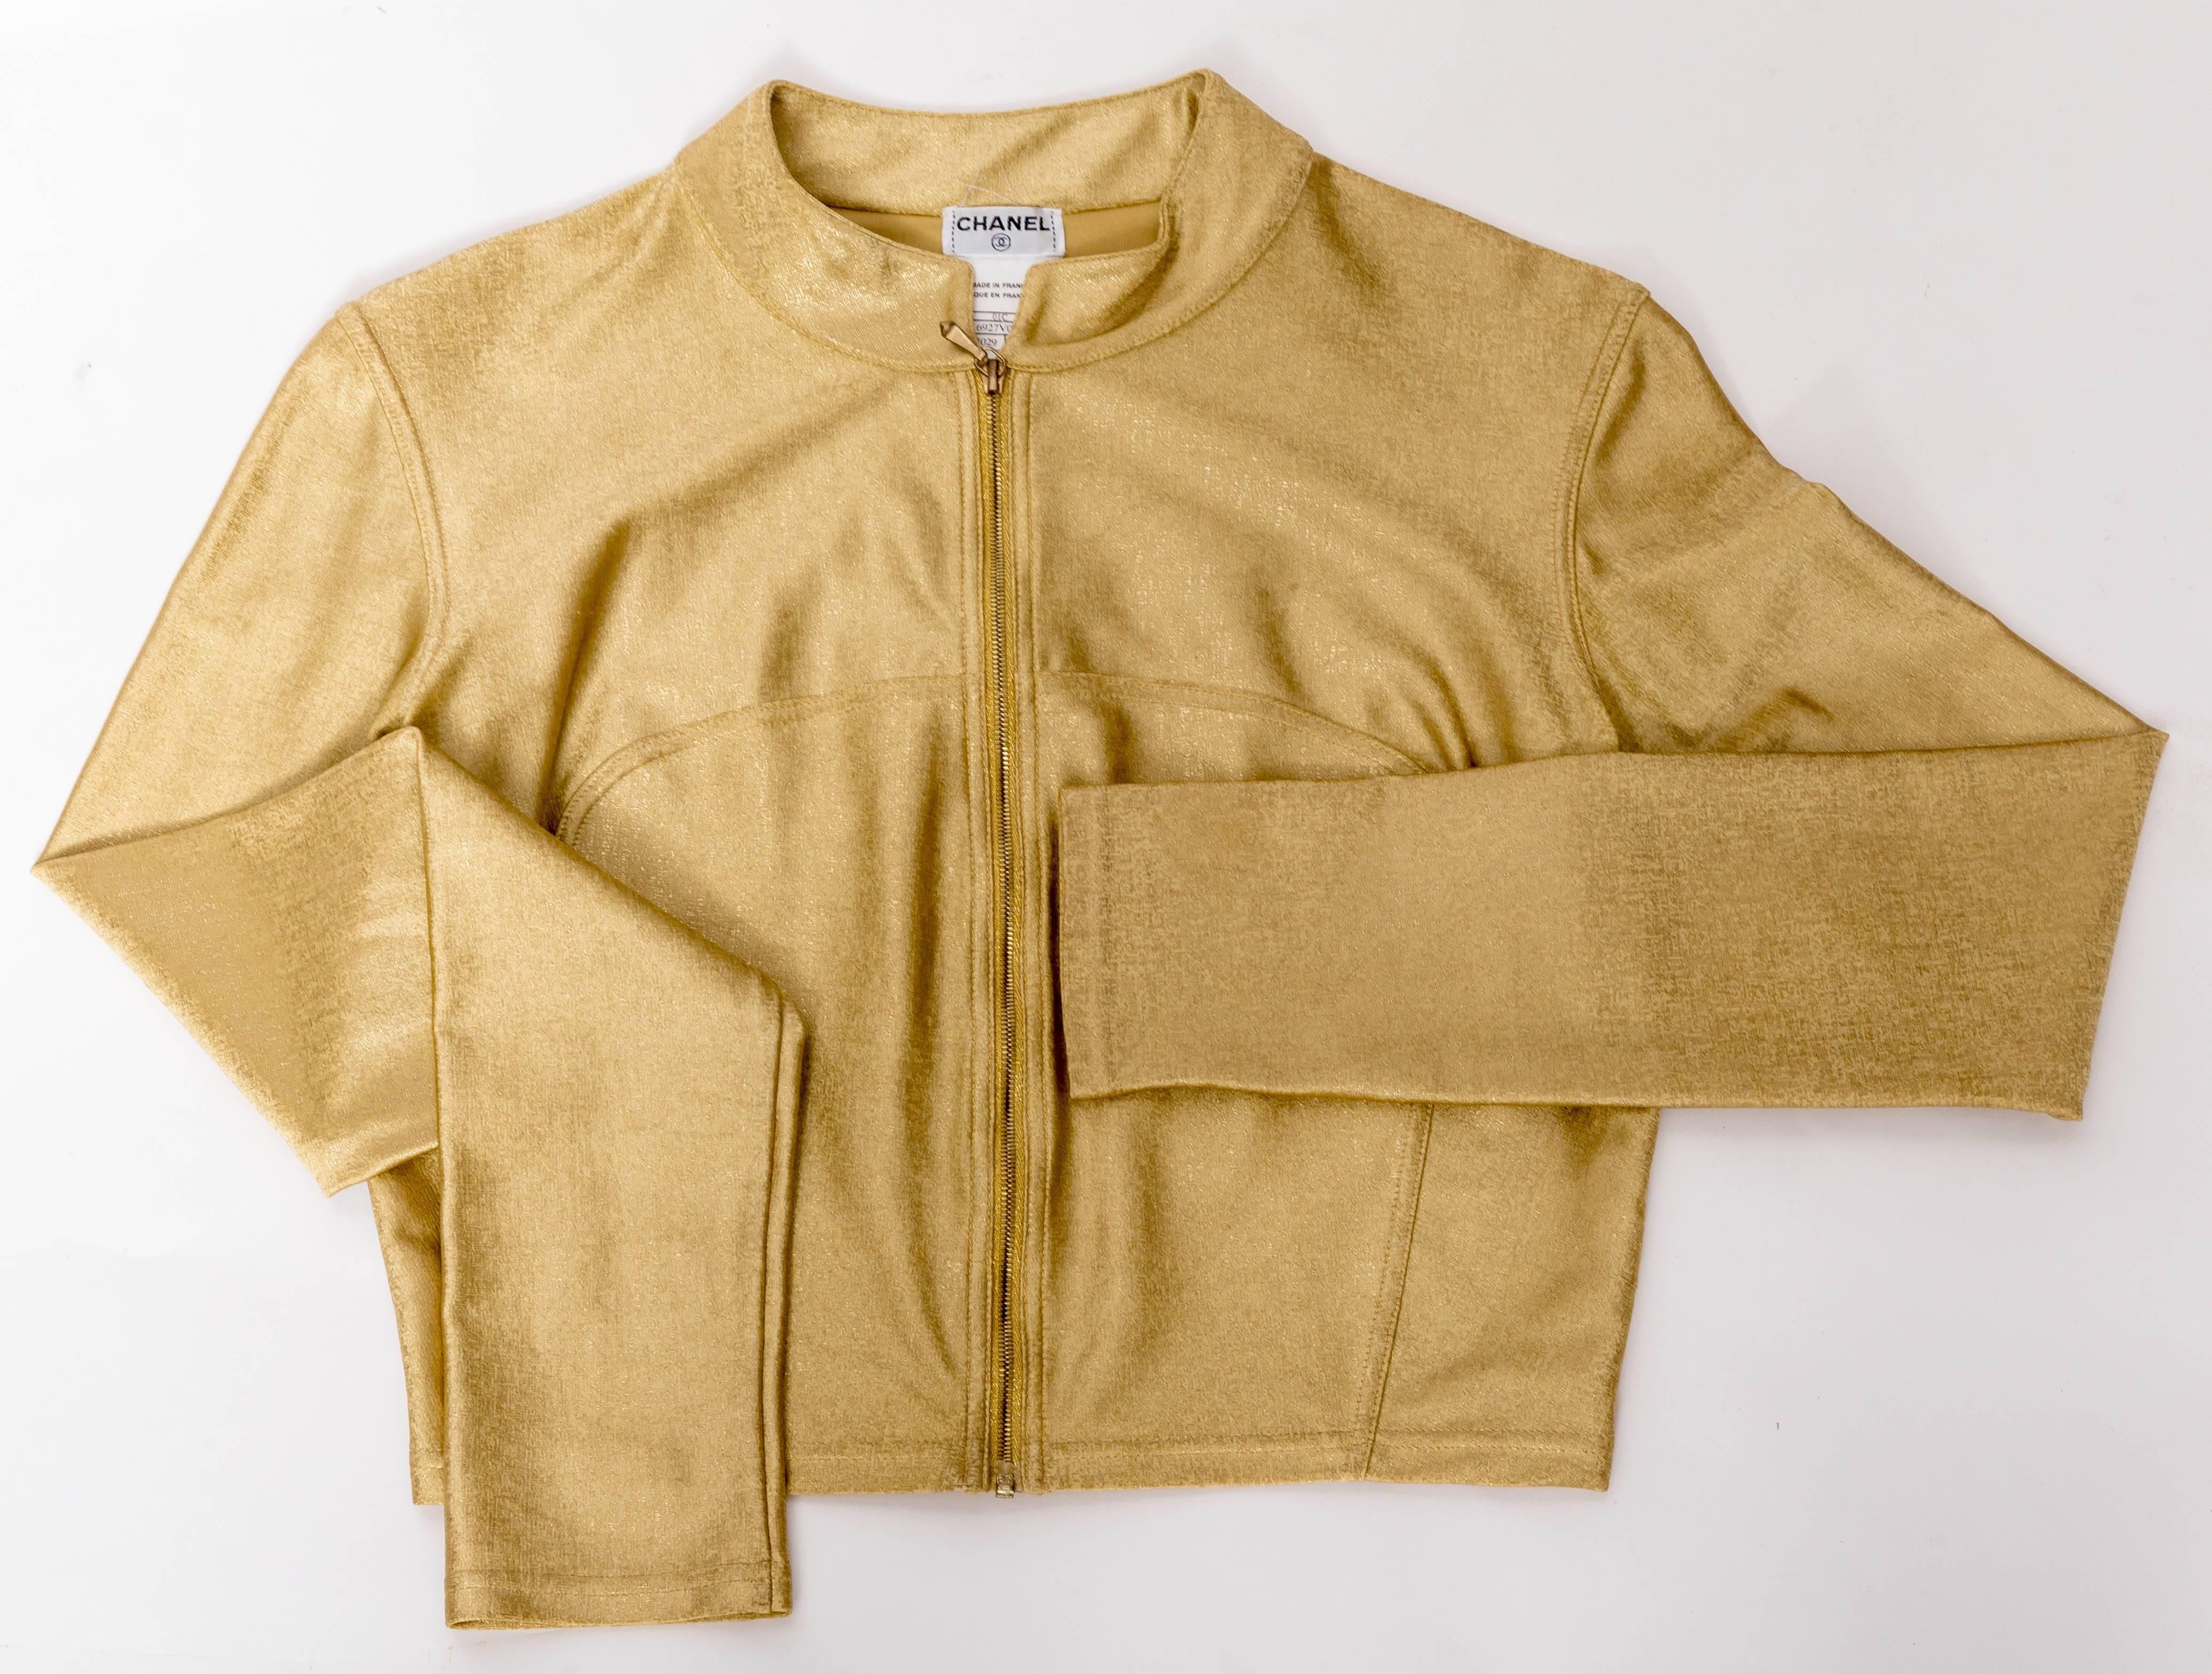 Vintage Chanel Gold Cropped Zip Top - Size 38 2